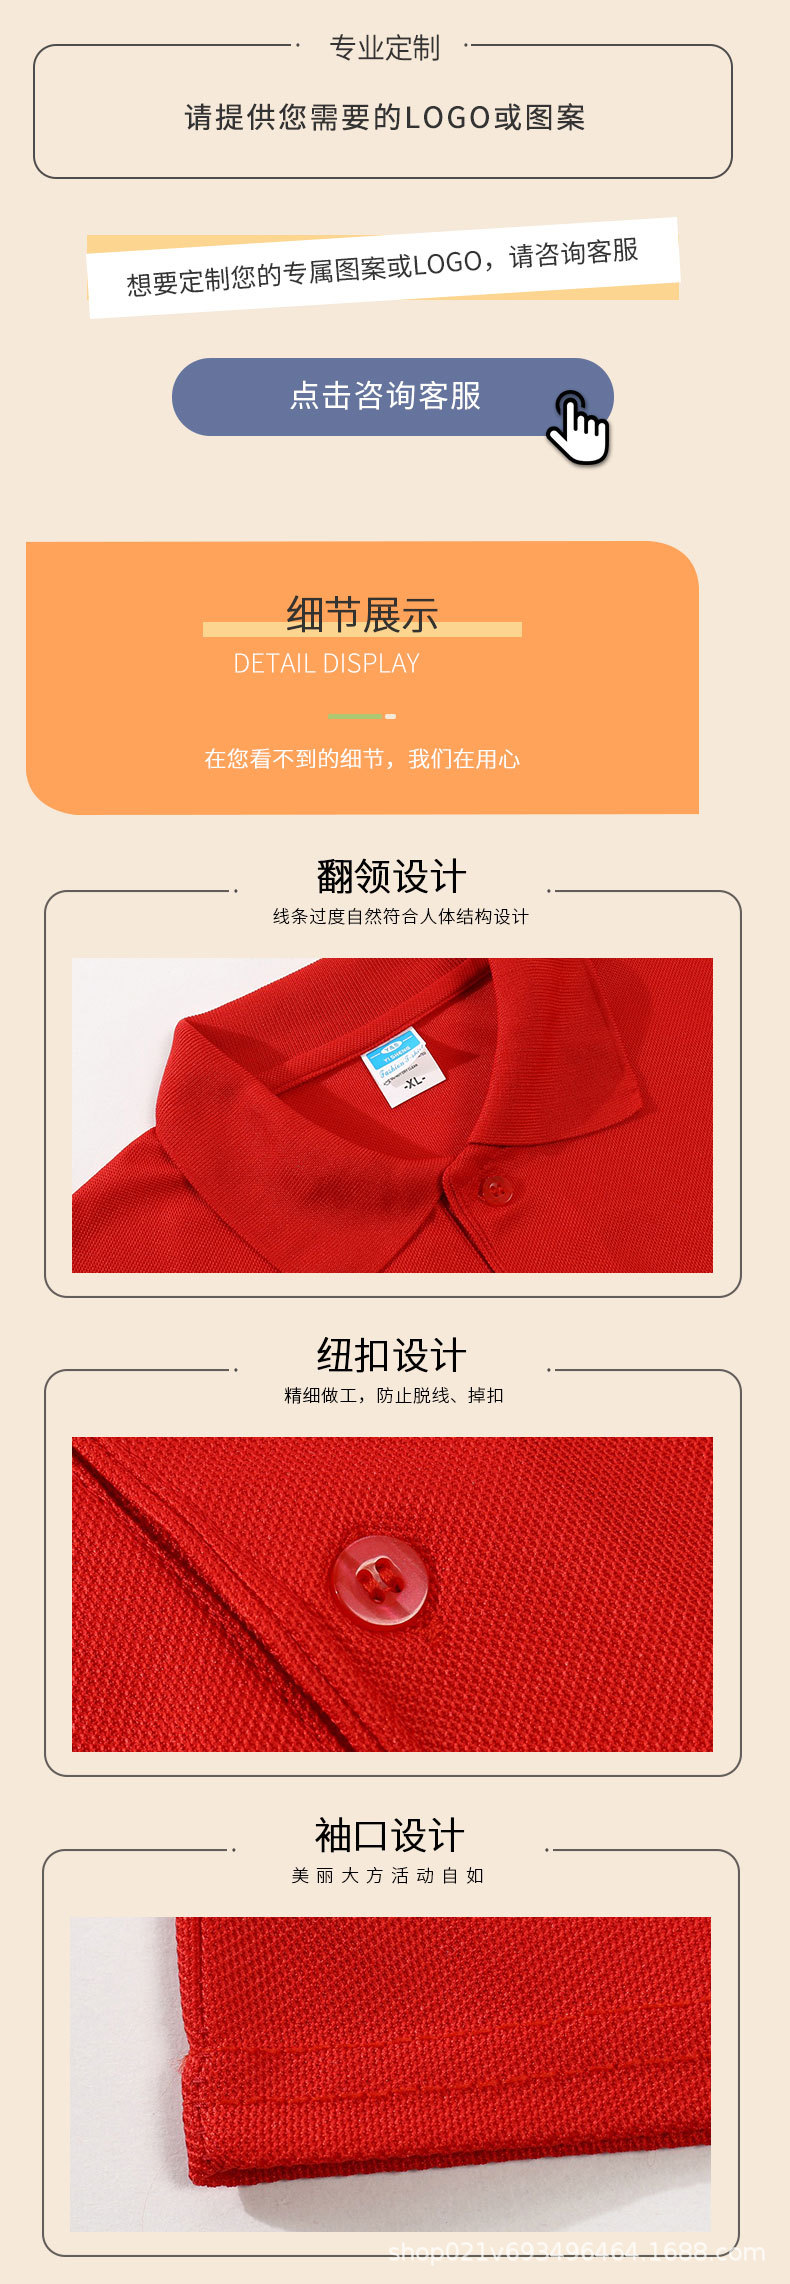 Polo shirt with rolled collar and short sleeves, customized advertising shirt, work shirt, T-shirt, activity and party wear, corporate culture shirt, logo printing